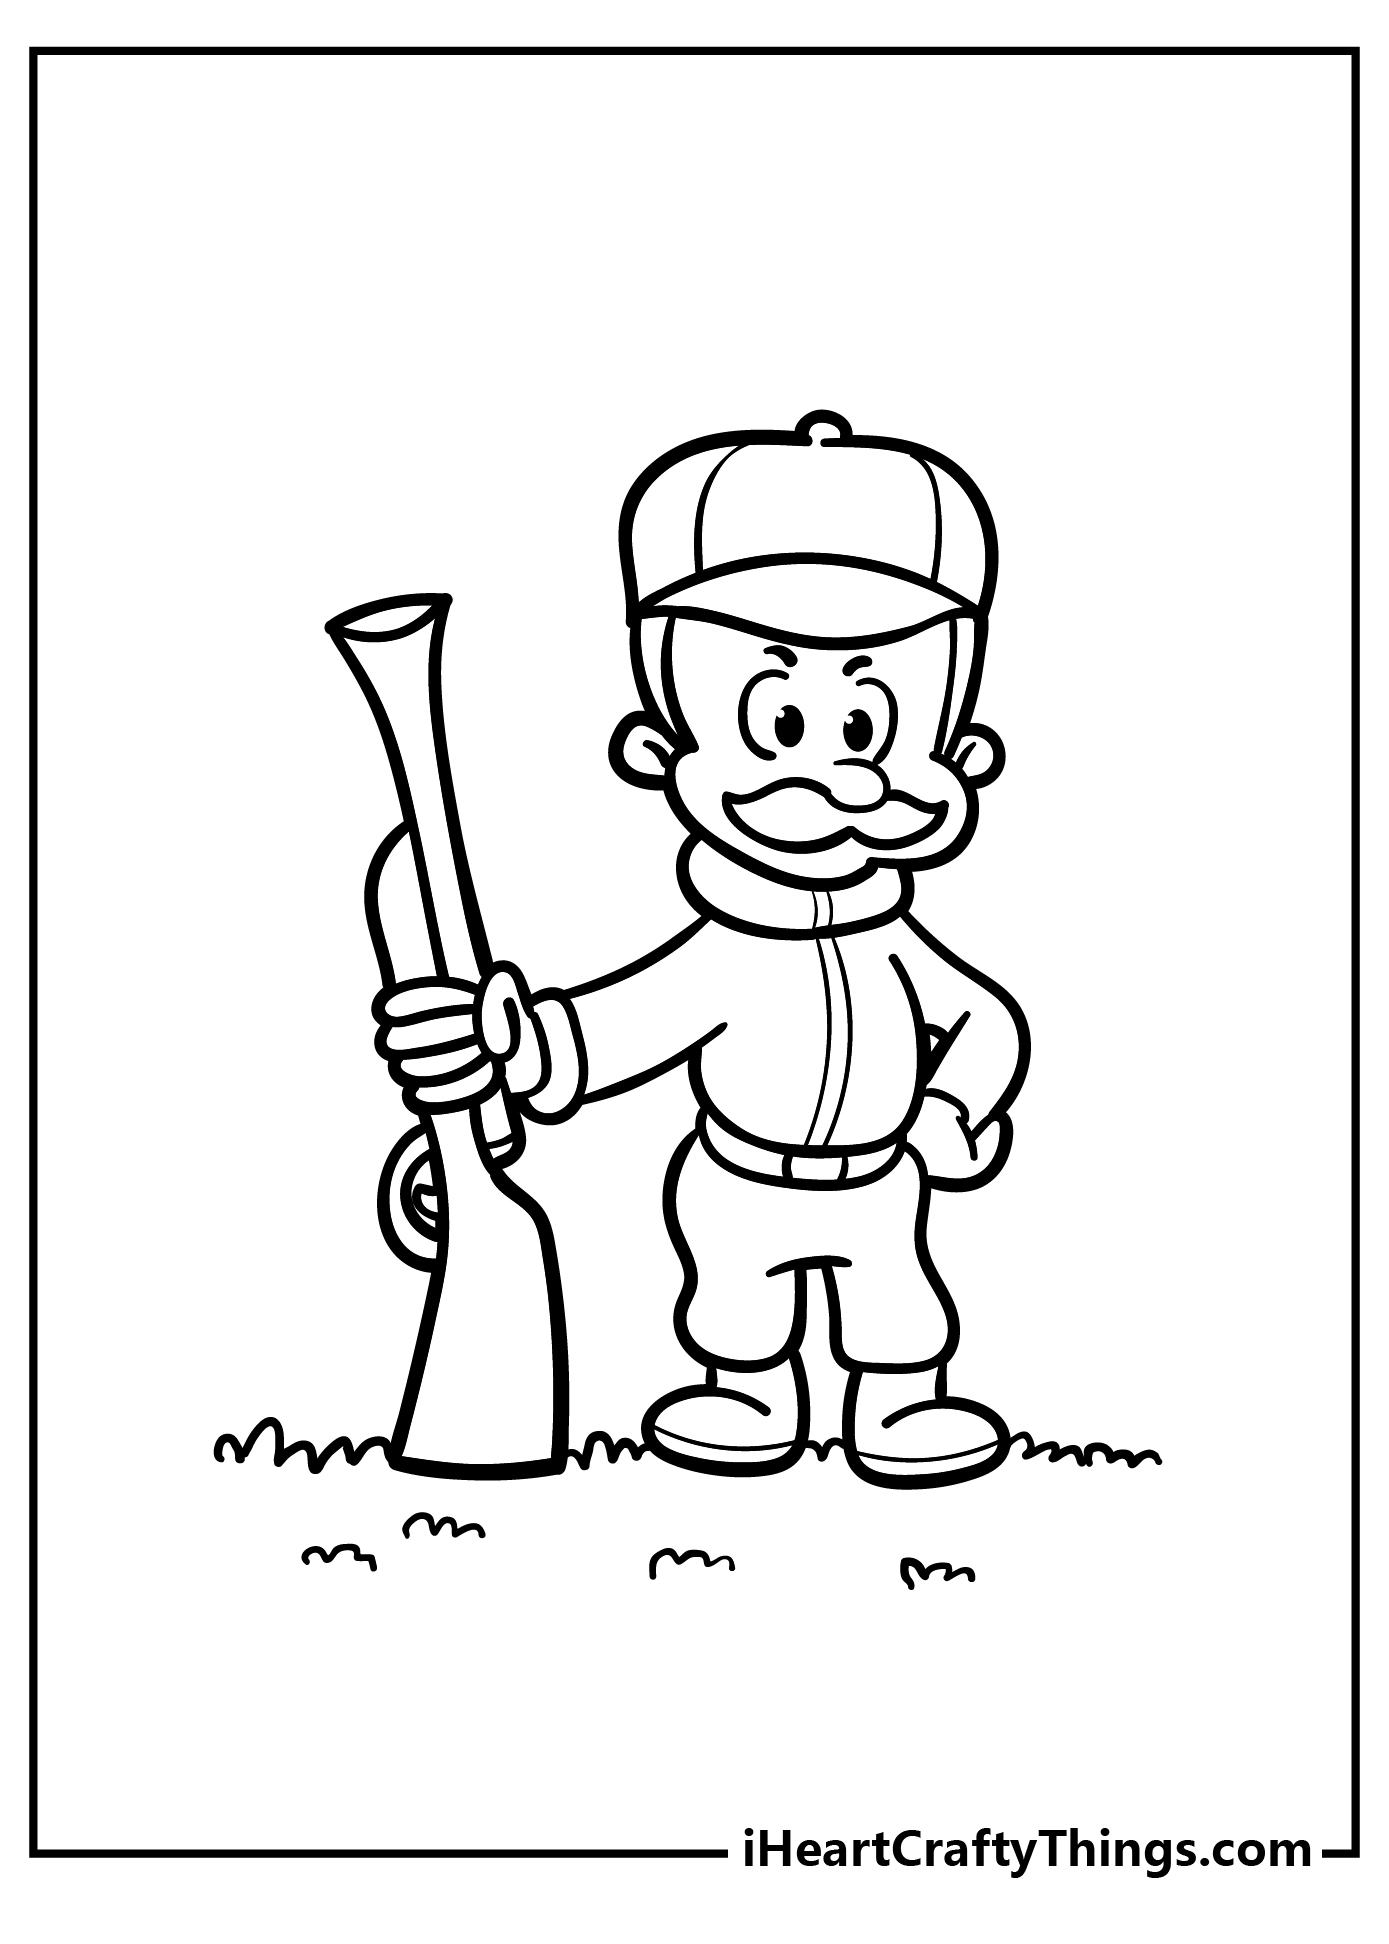 Hunting Coloring Pages for adults free printable